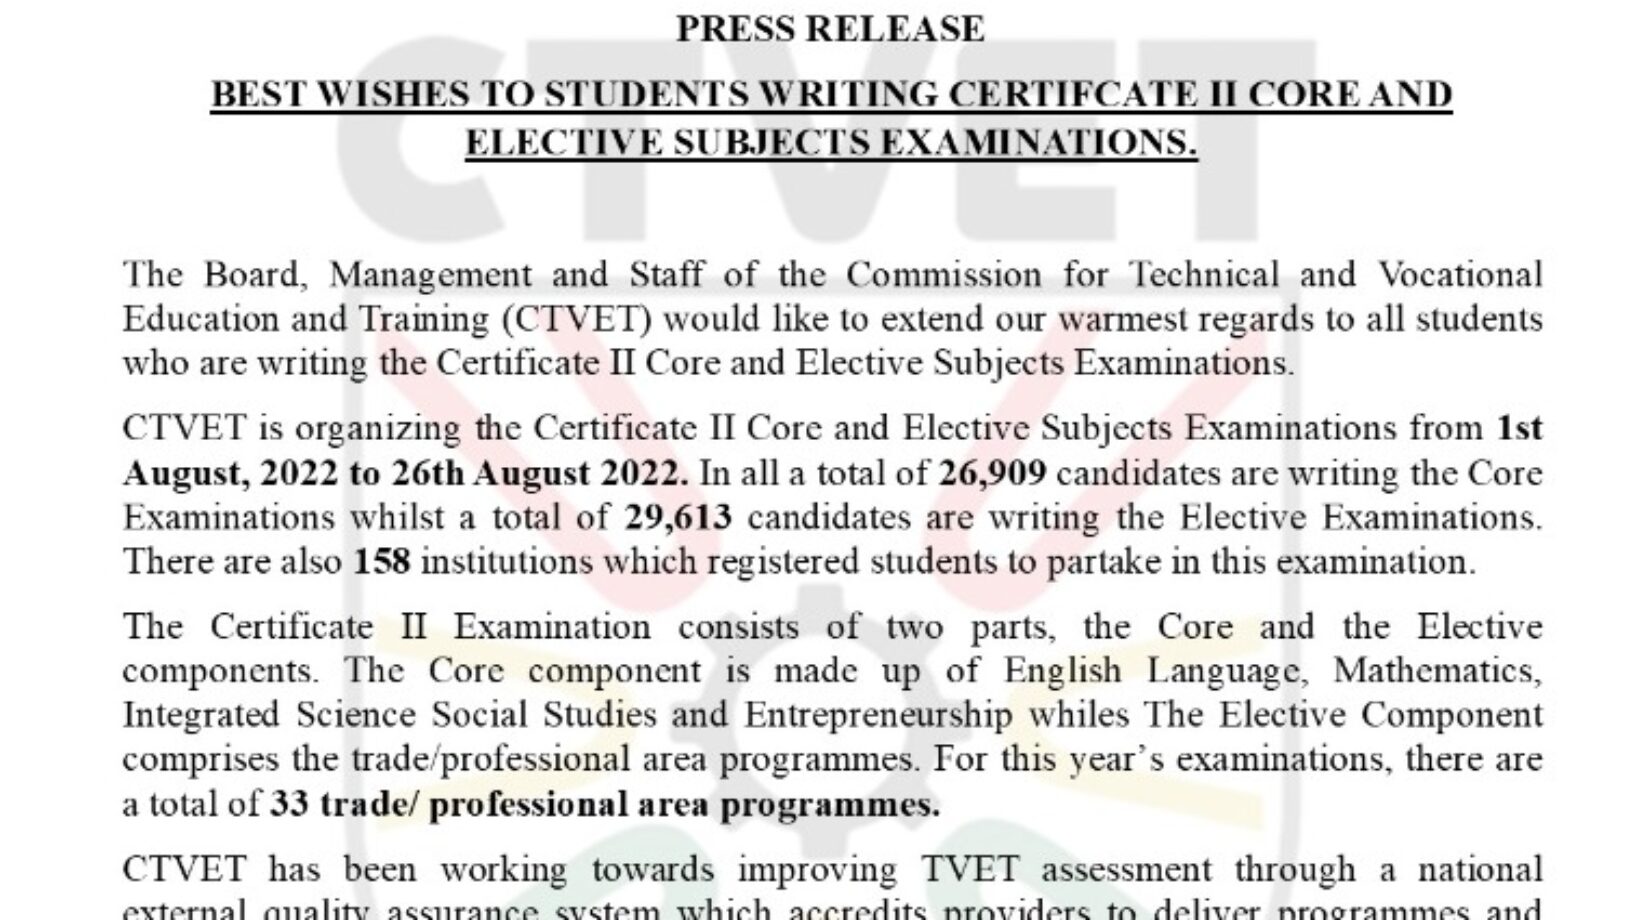 CTVET SENDS BEST WISHES TO STUDENTS WRITING CERTIFCATE II CORE AND ELECTIVE SUBJECTS EXAMINATIONS